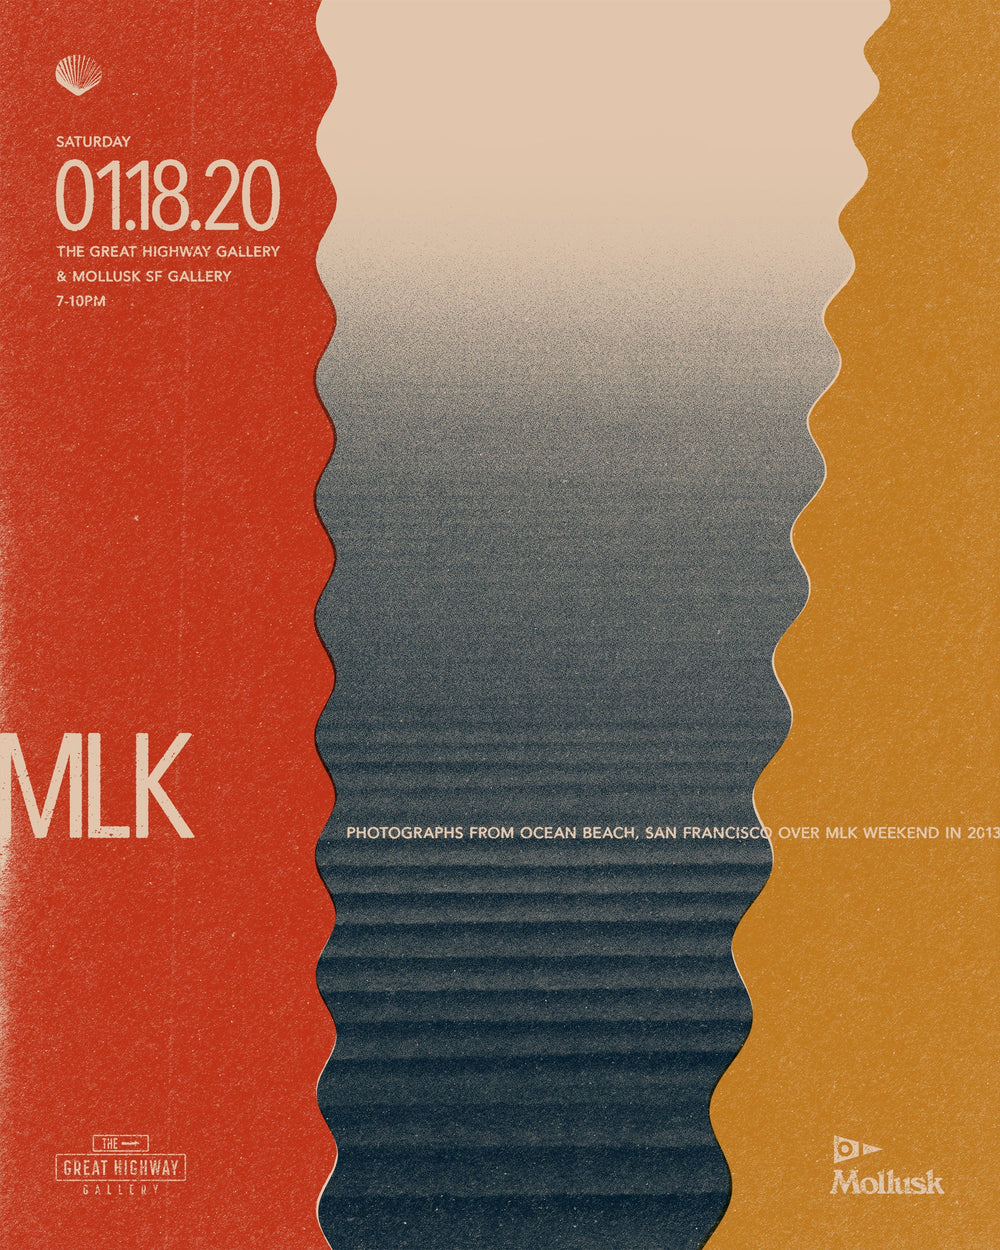 The MLK Show - A group exhibition at Mollusk SF and The Great Highway Gallery